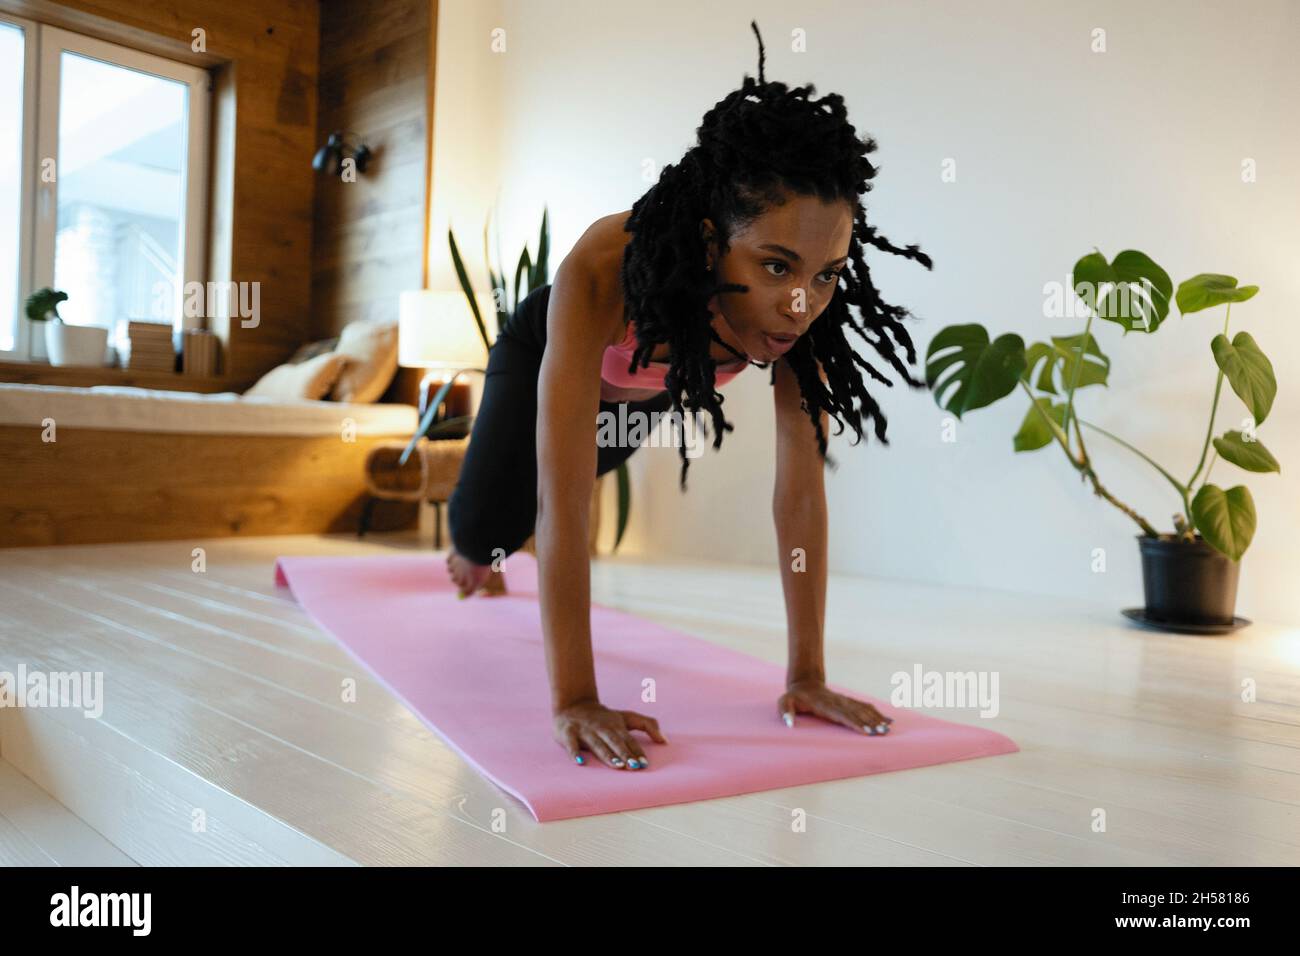 Strong Beautiful Fitness Girl in Athletic Workout Clothes is Doing a Plank Exercise. She is Training at Home in Her Living Room with Cozy Interior. Stock Photo